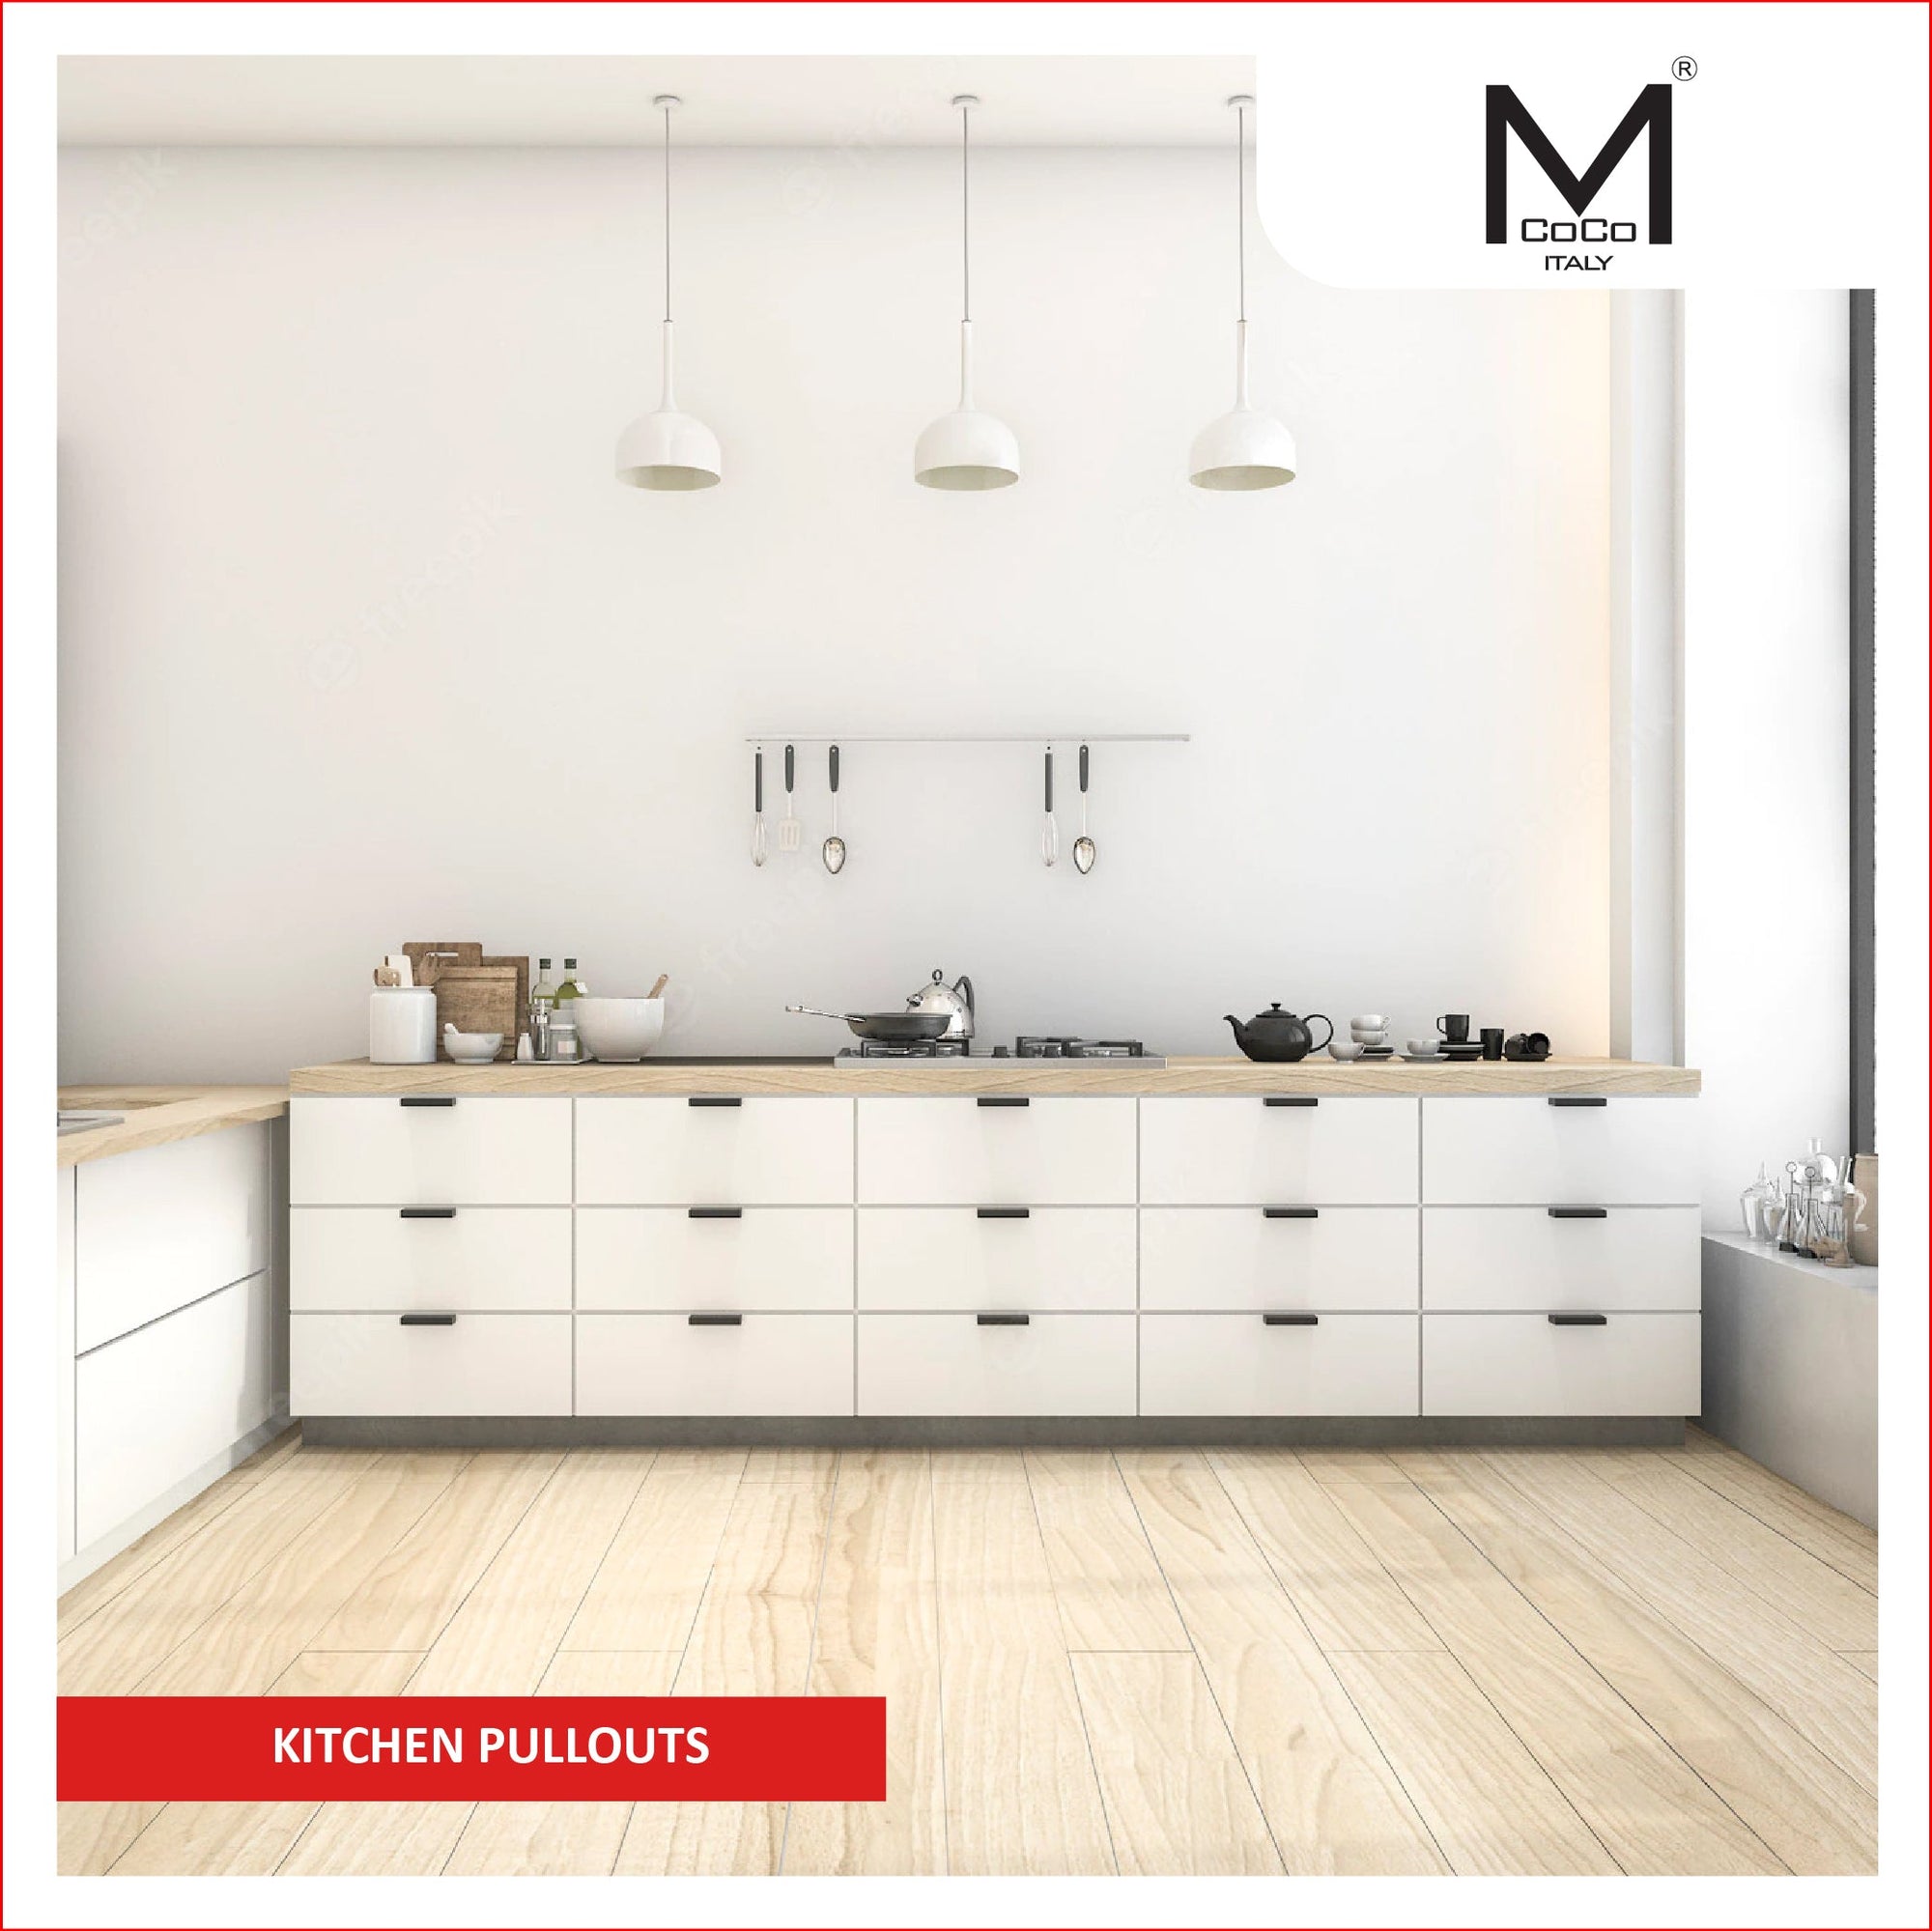 Mcoco Kitchen Pullouts - Efficient and stylish kitchen organization solutions for optimal storage and convenience.